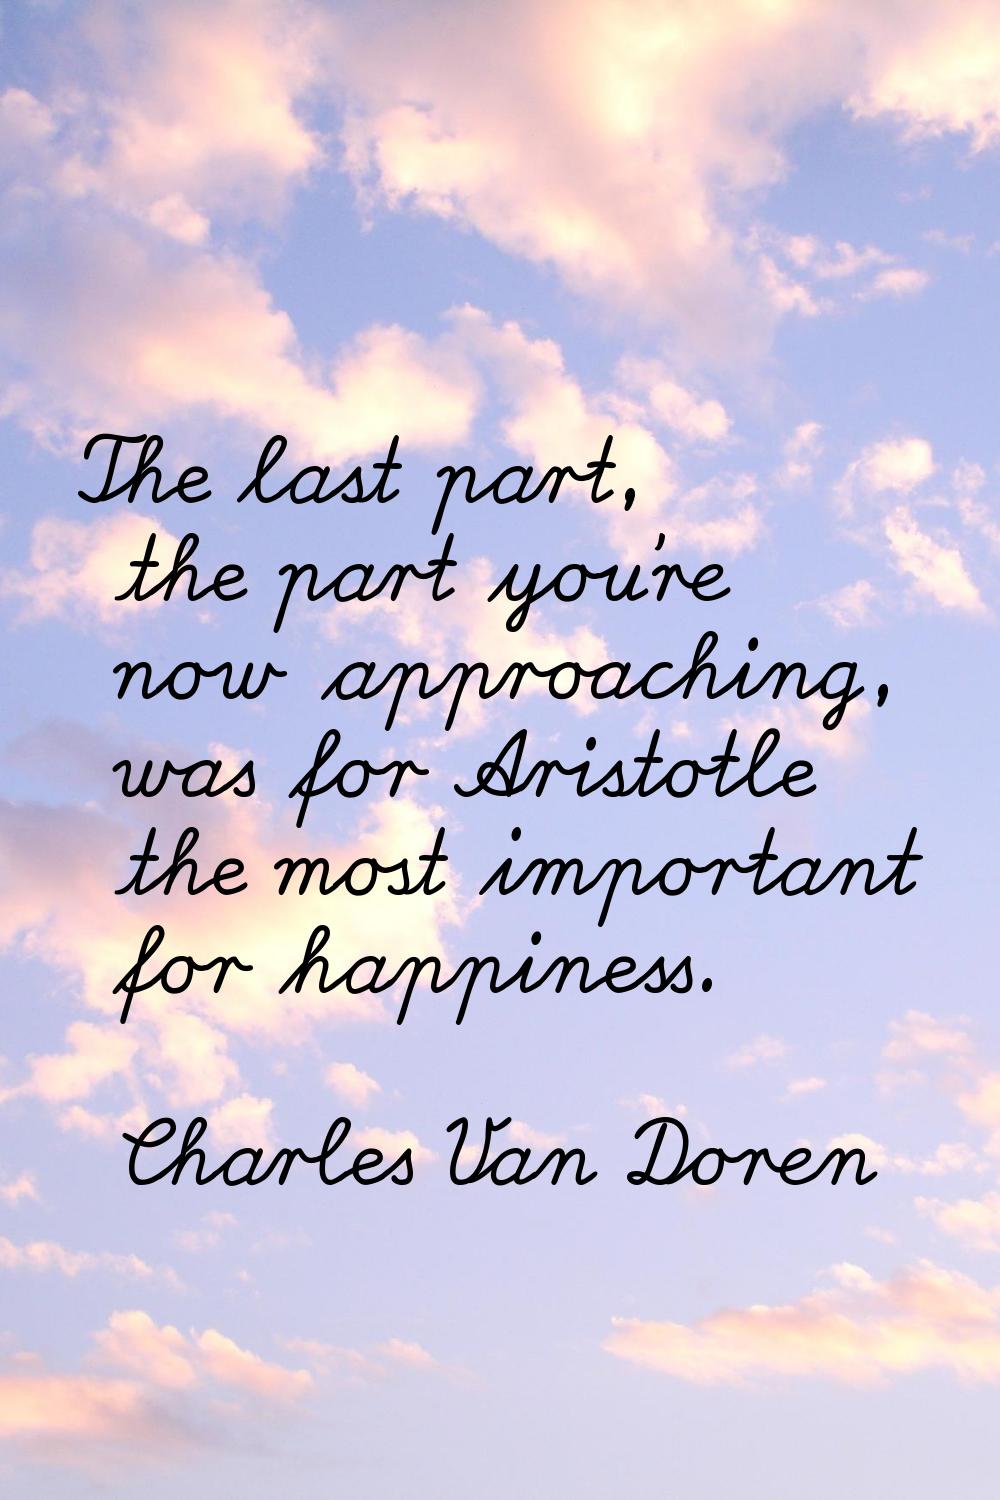 The last part, the part you're now approaching, was for Aristotle the most important for happiness.